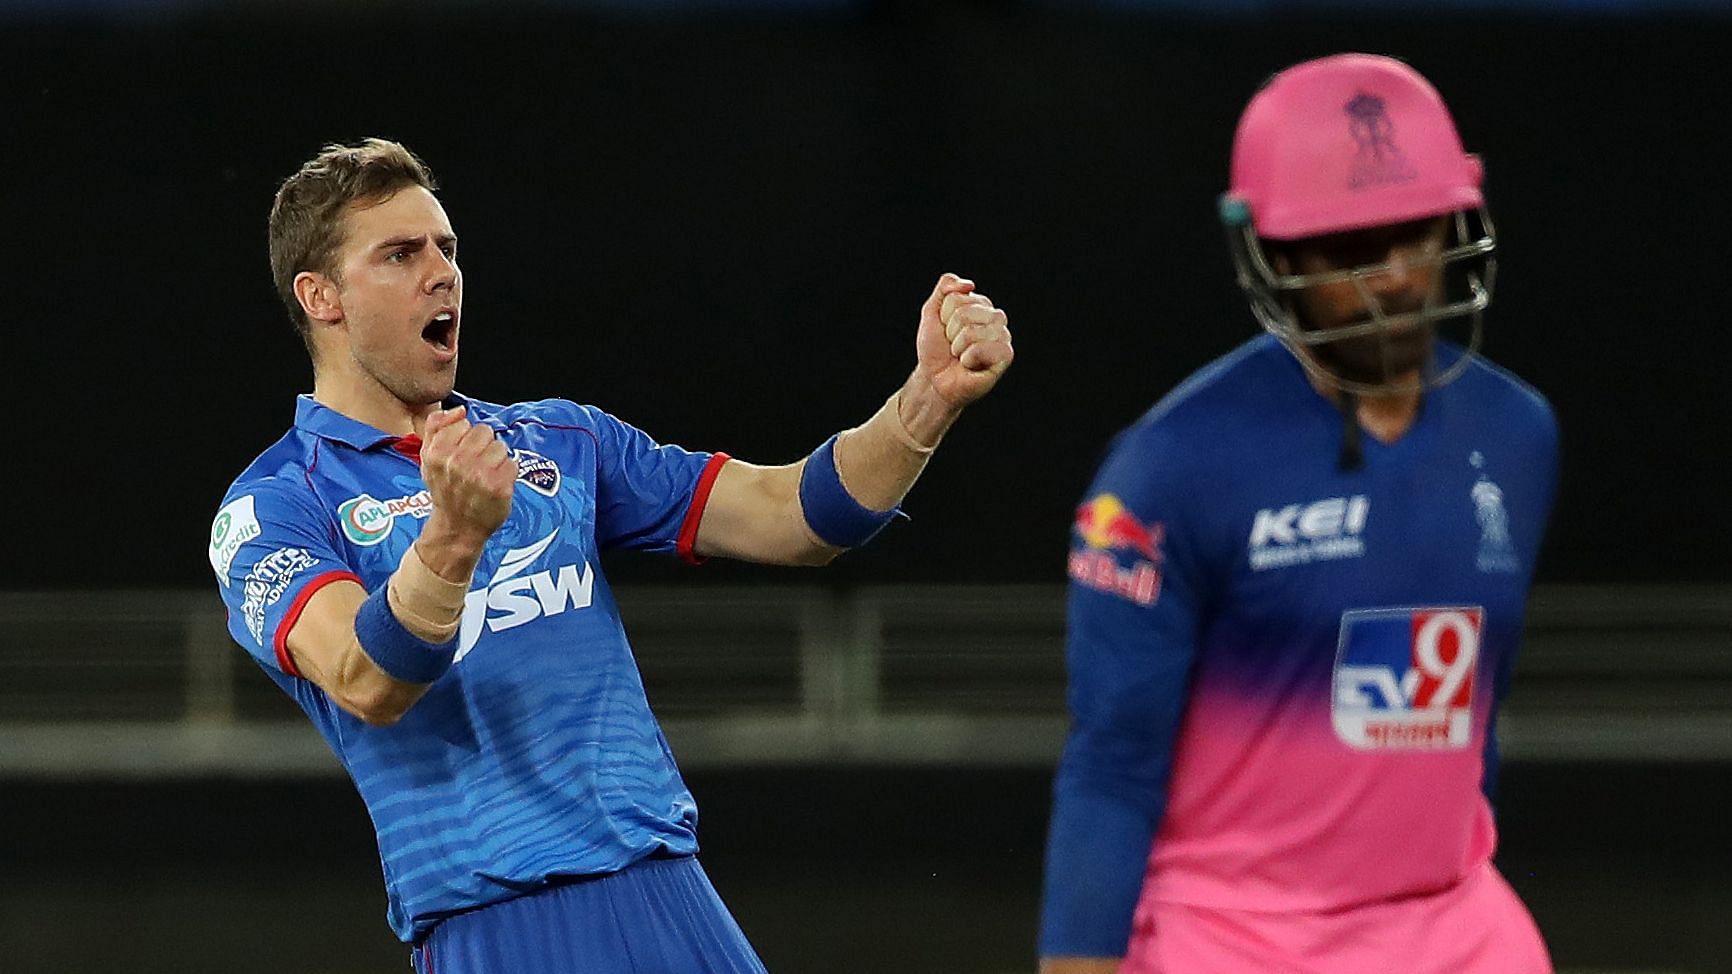 Rajasthan Royals lost to Delhi Capitals in their Indian Premier League match on Wednesday.&nbsp;